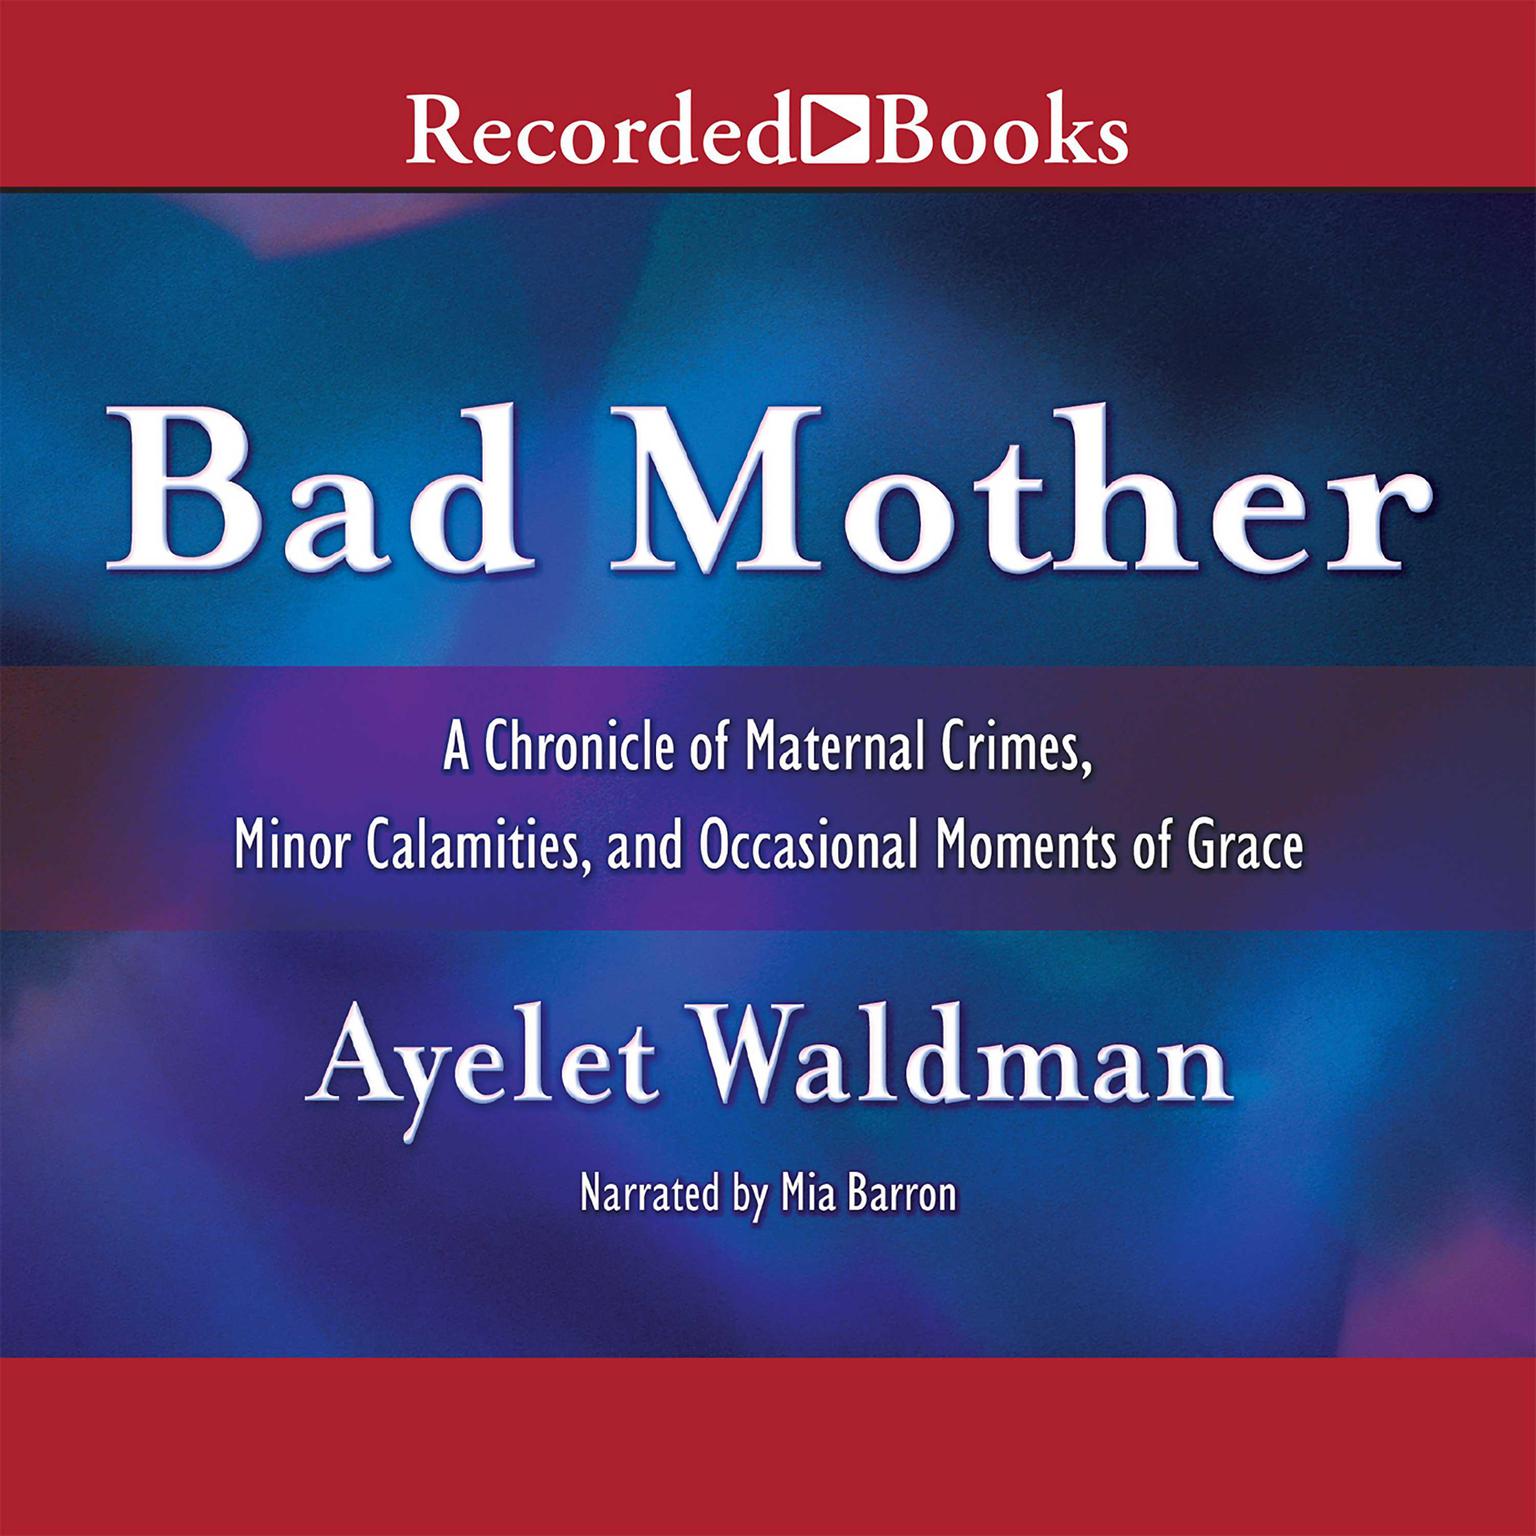 Bad Mother: A Chronicle of Maternal Crimes, Minor Calamities, and Occasional Moments of Grace Audiobook, by Ayelet Waldman